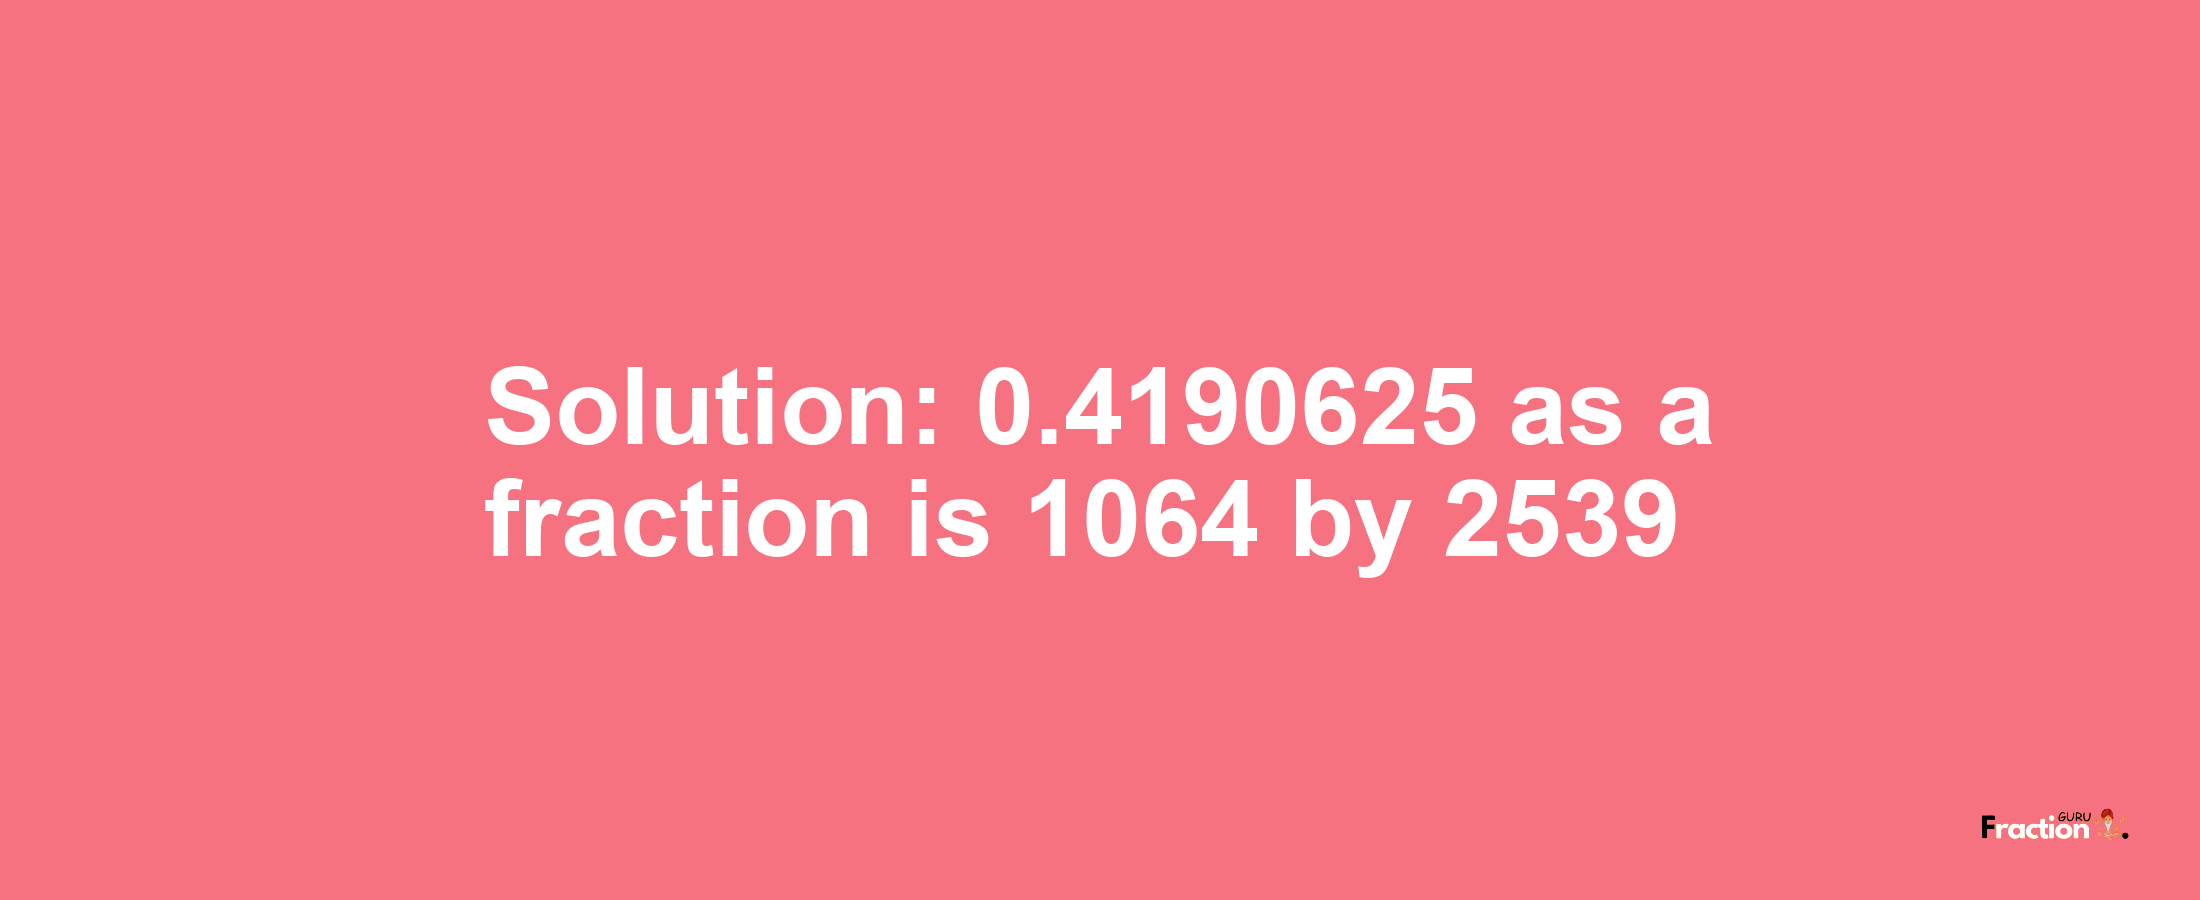 Solution:0.4190625 as a fraction is 1064/2539